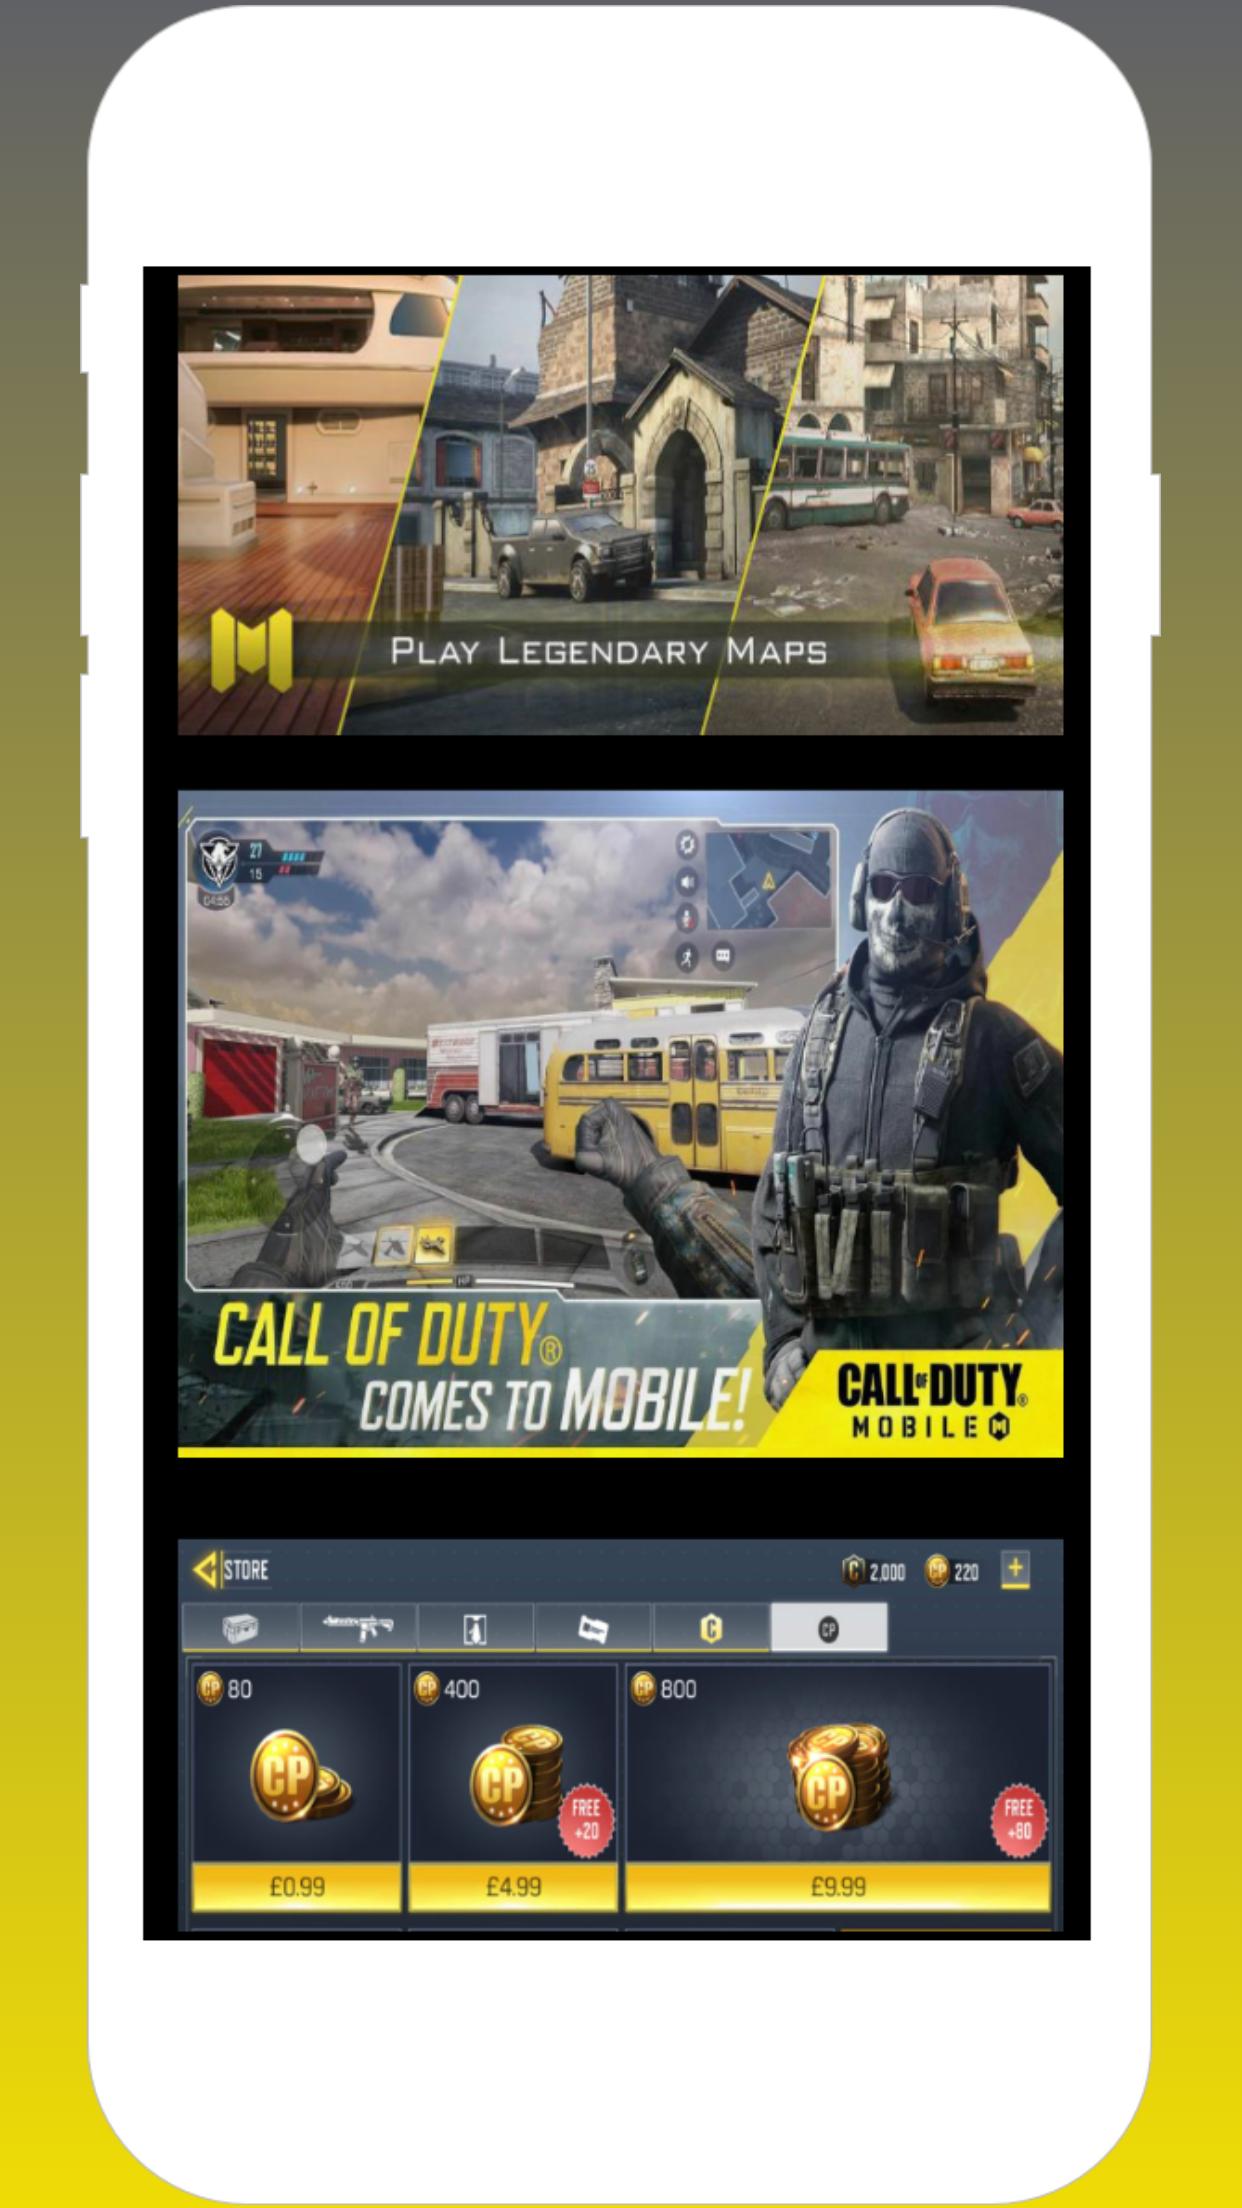 [Free 2020] Free Cod Points & Credits Download Call Of Duty Mobile Garena Indonesia